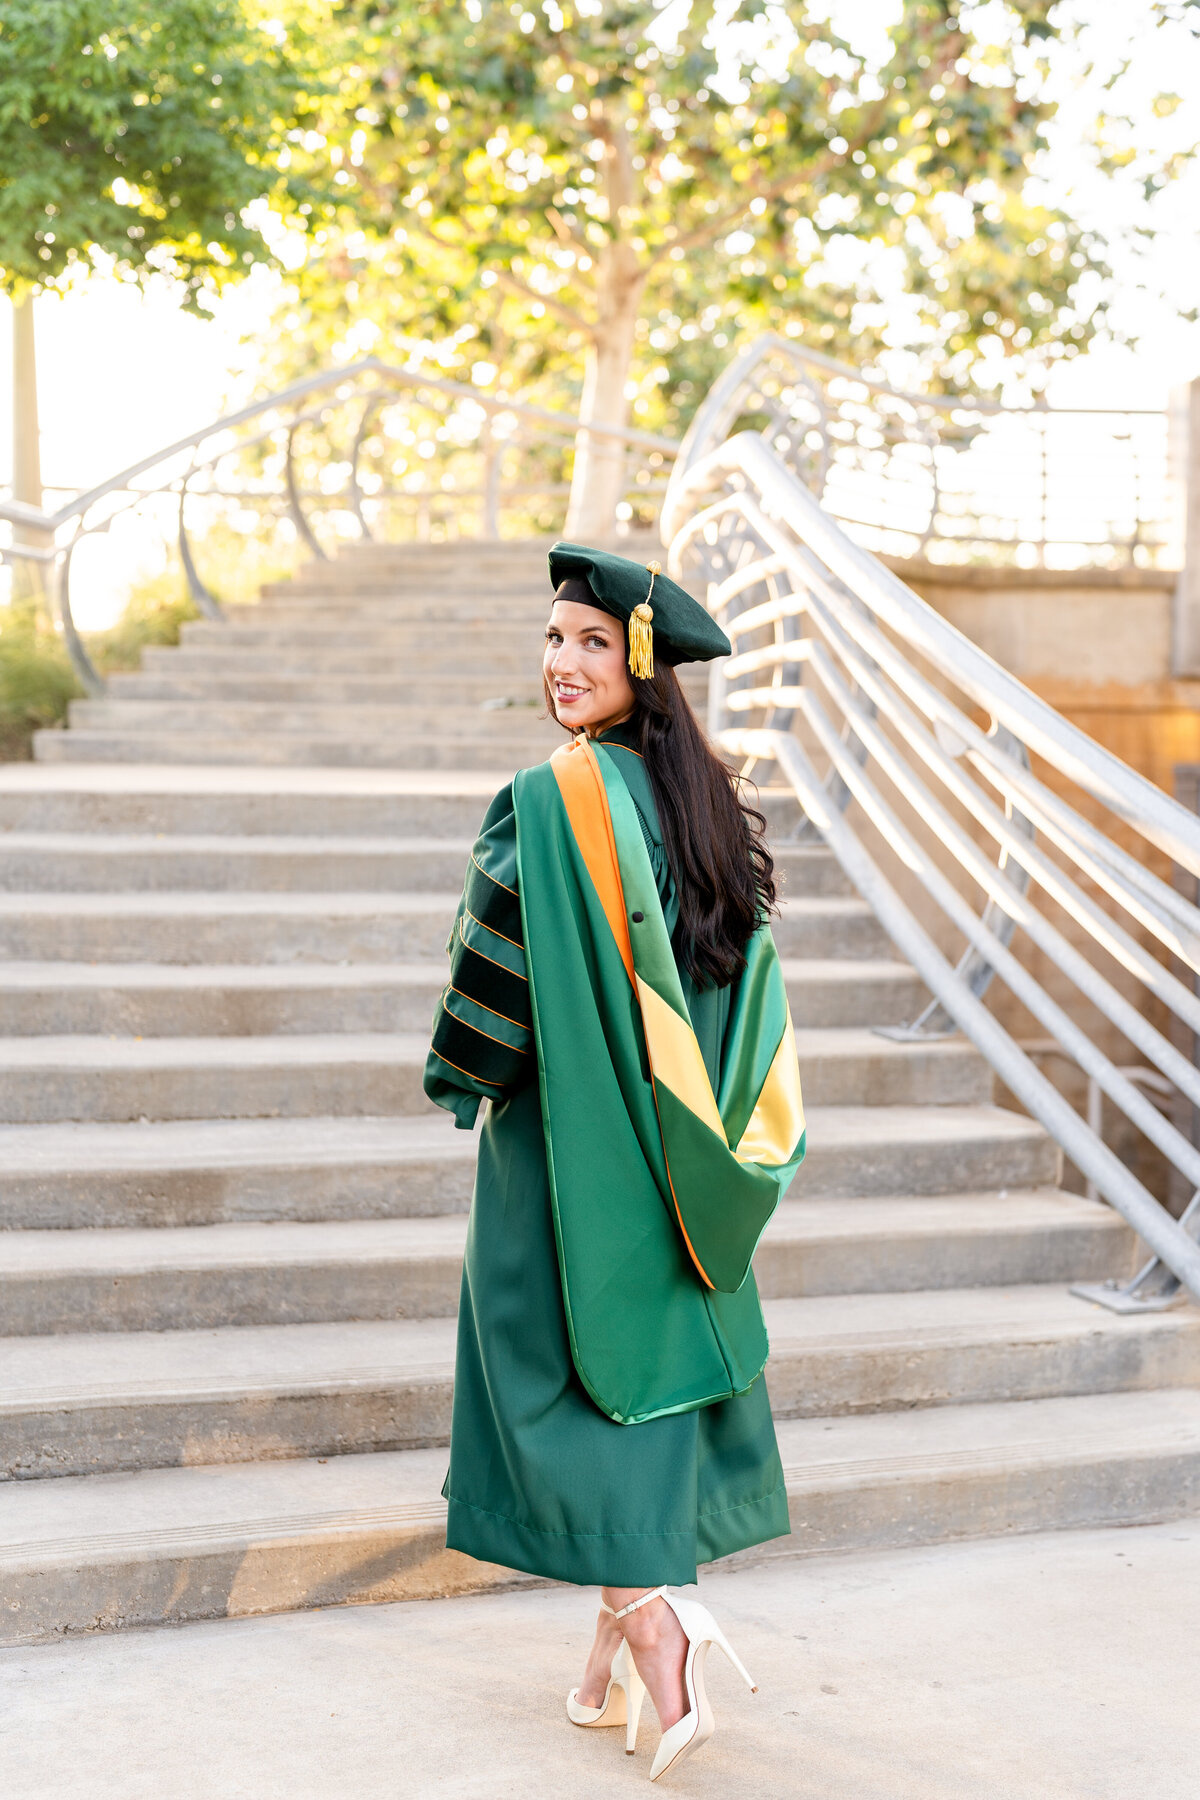 Baylor doctorate senior photos with gown, hood and hat in front of stairs and trees at golden hour